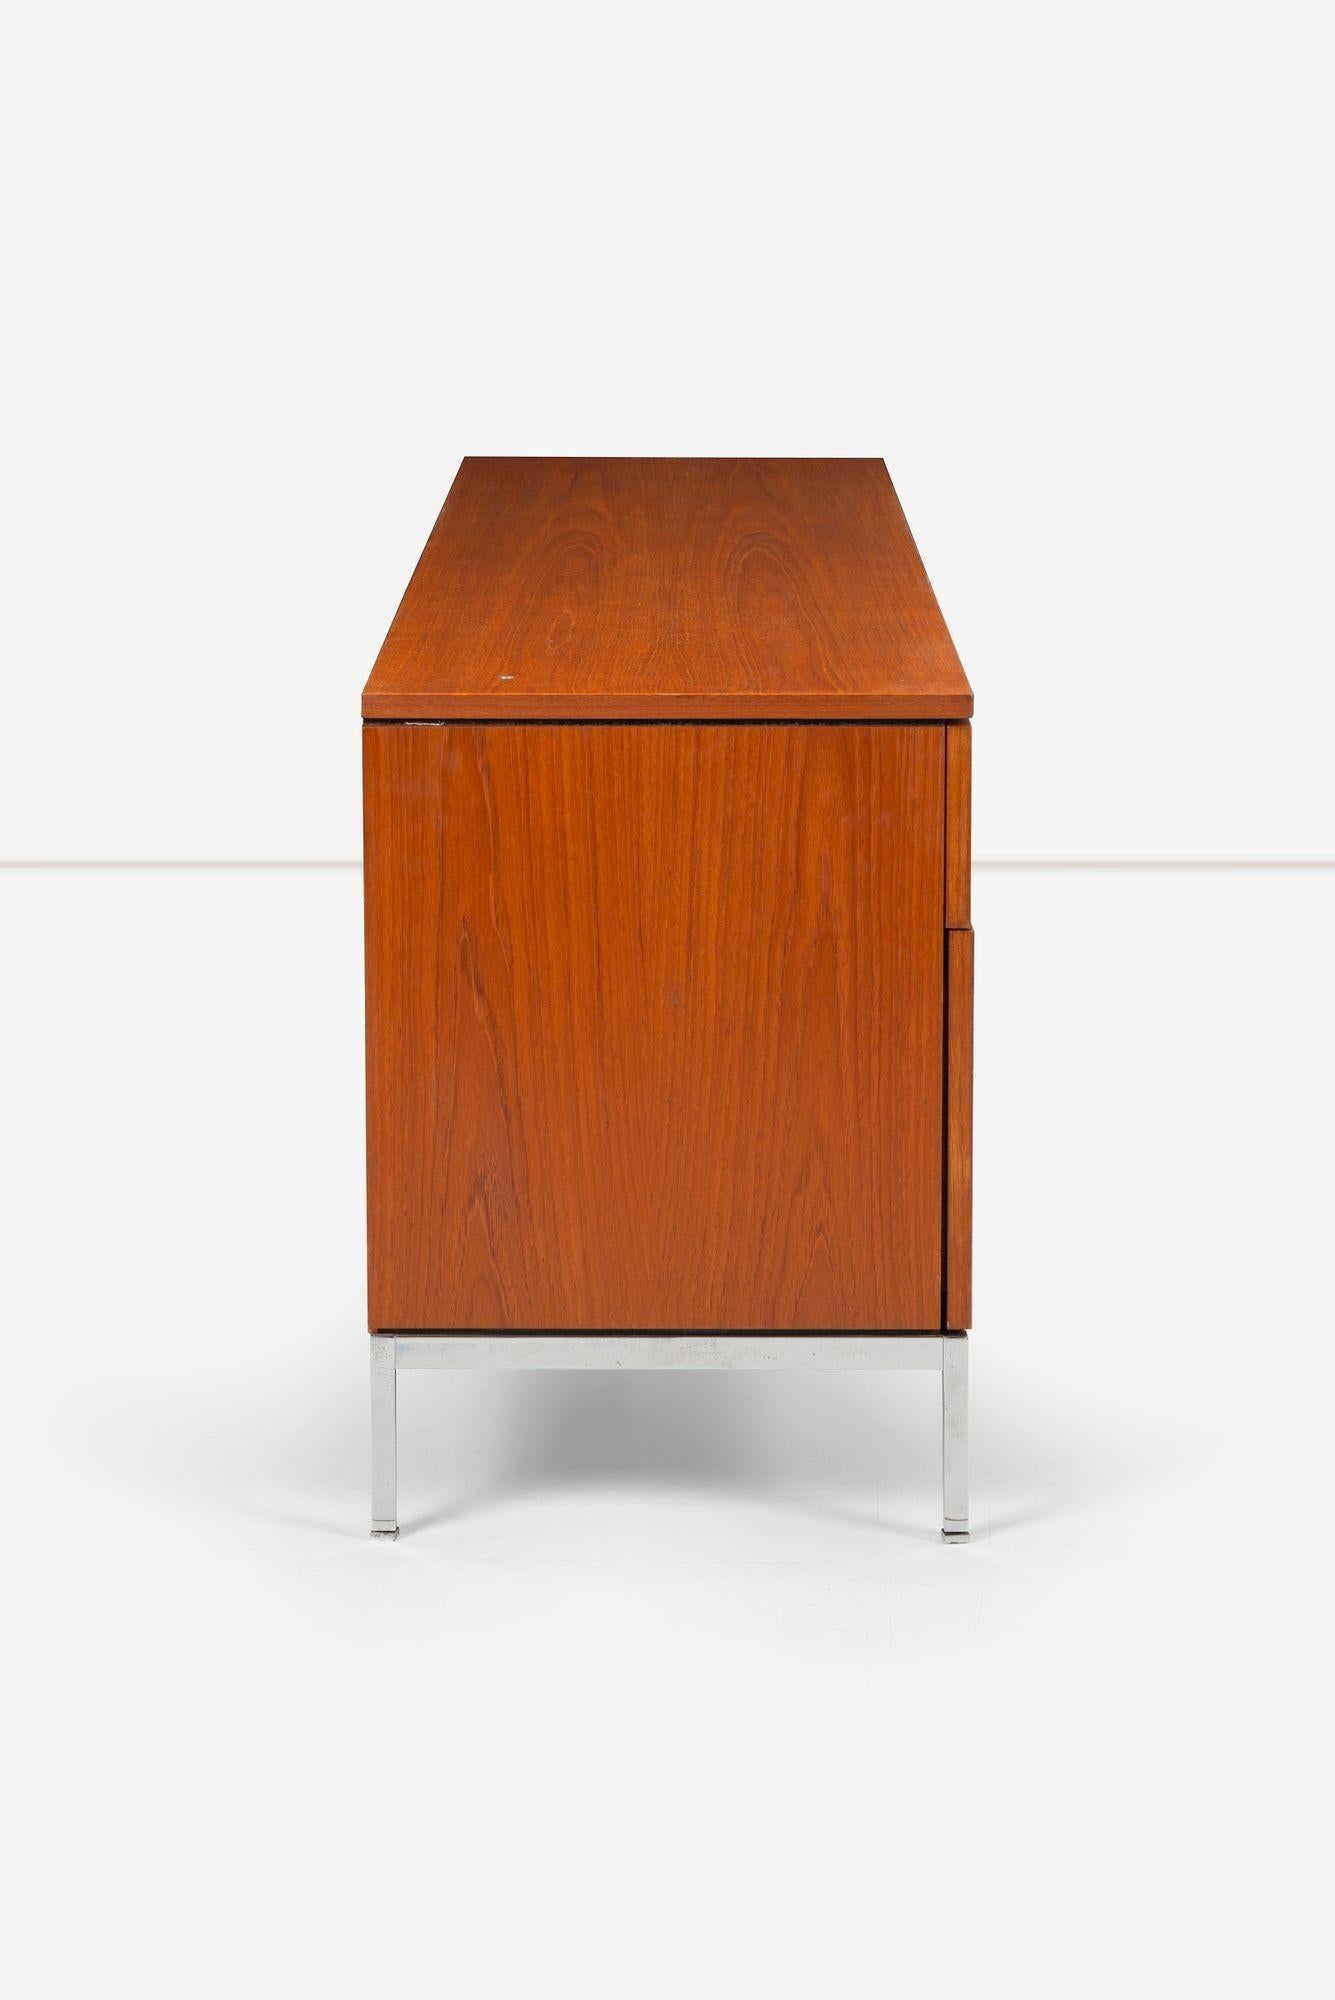 Florence Knoll Eight-Drawer Credenza in Teakwood For Sale 1